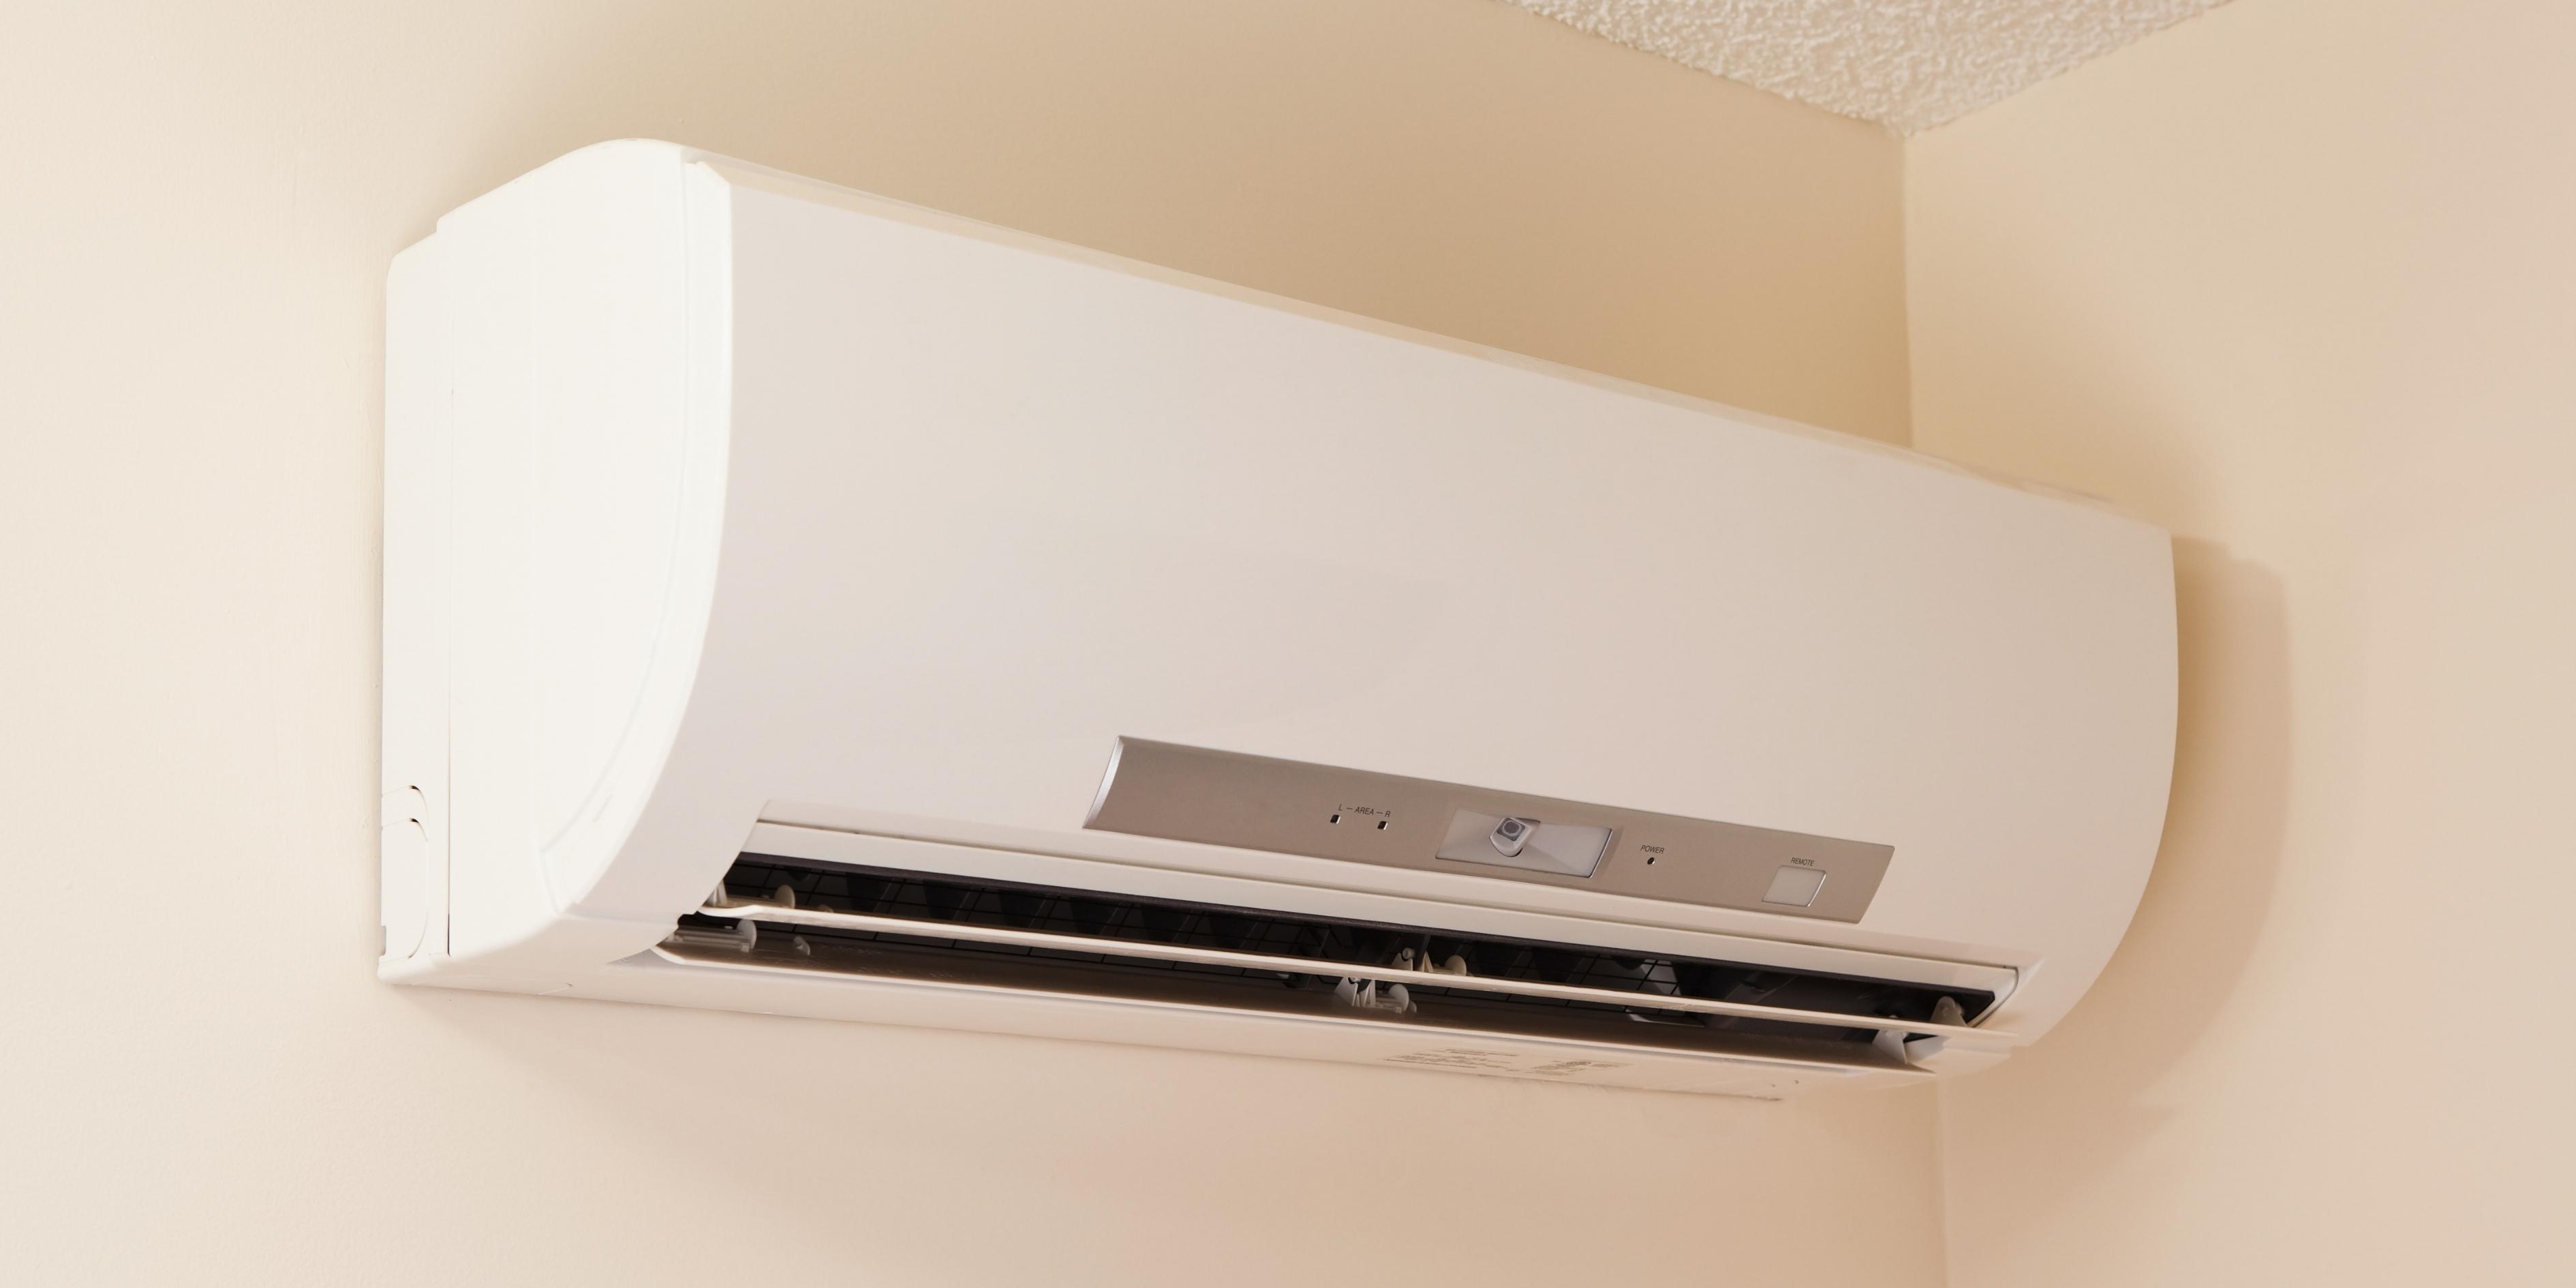 Optimise Your Heat Pump for the Winter